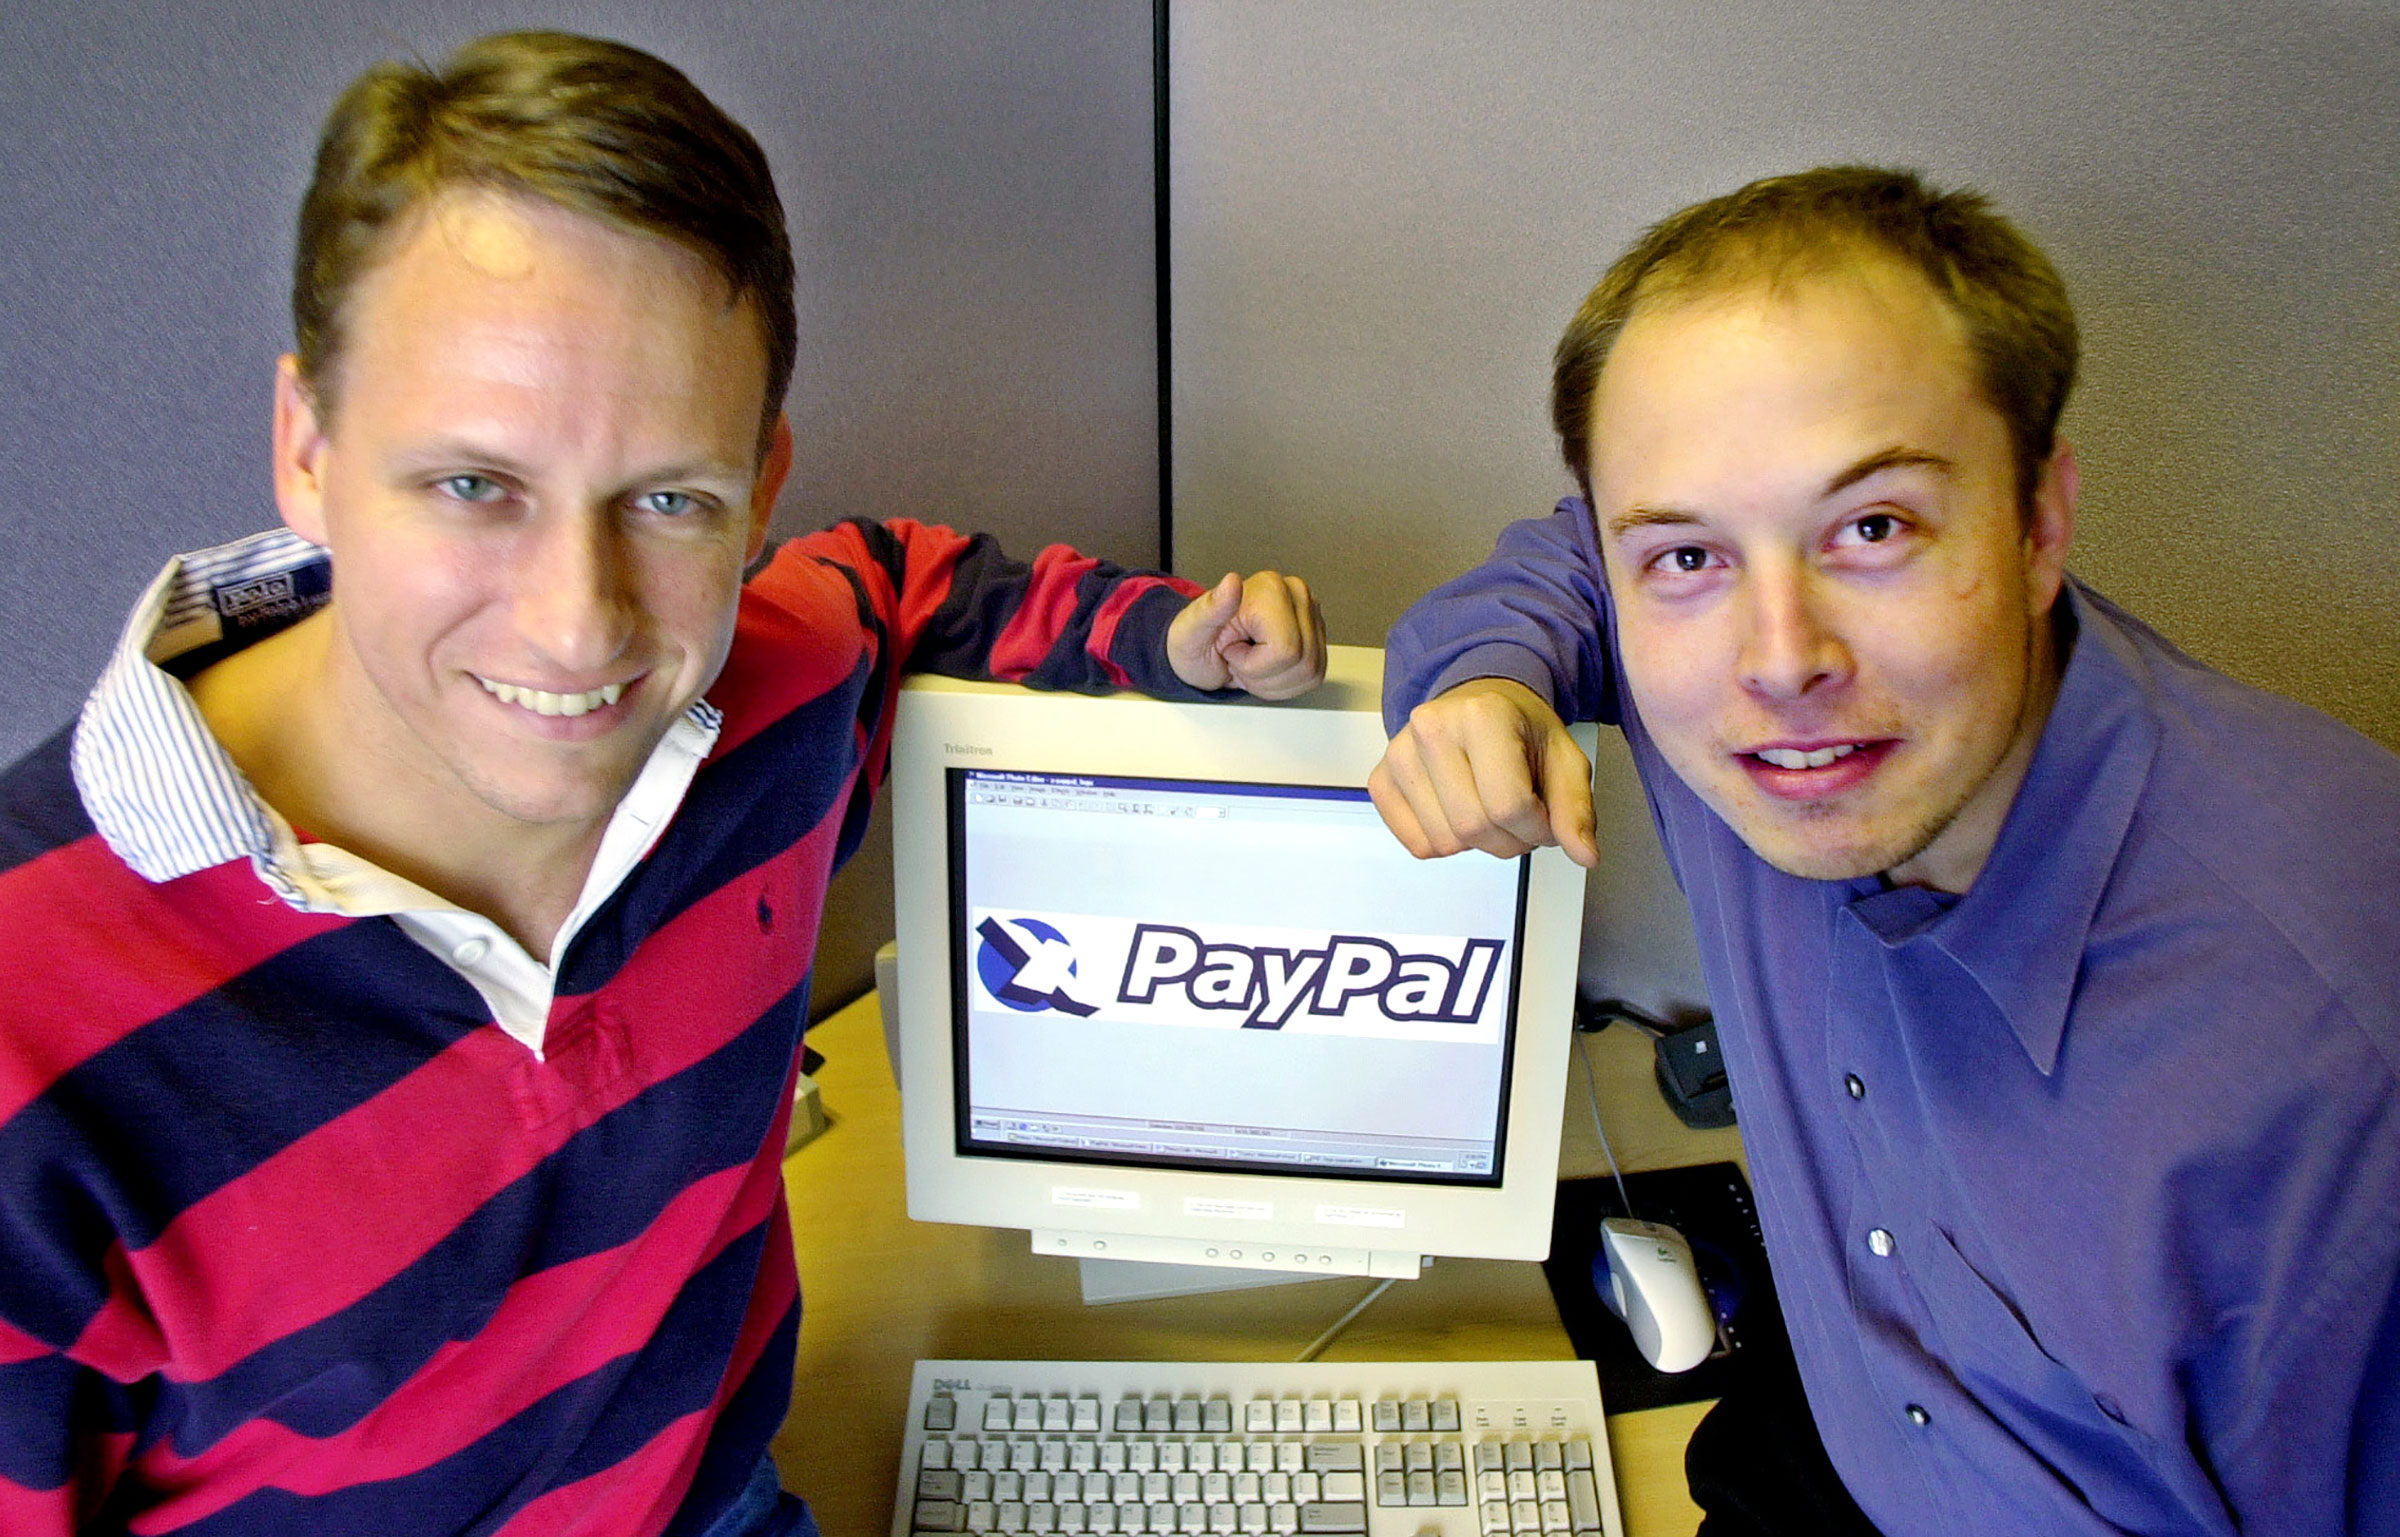 PayPal Chief Executive Officer Peter Thiel, left, and founder Elon Musk, right, pose with the PayPal logo at corporate headquarters in Palo Alto, Calif. on Oct. 20, 2000. (Paul Sakuma—AP)